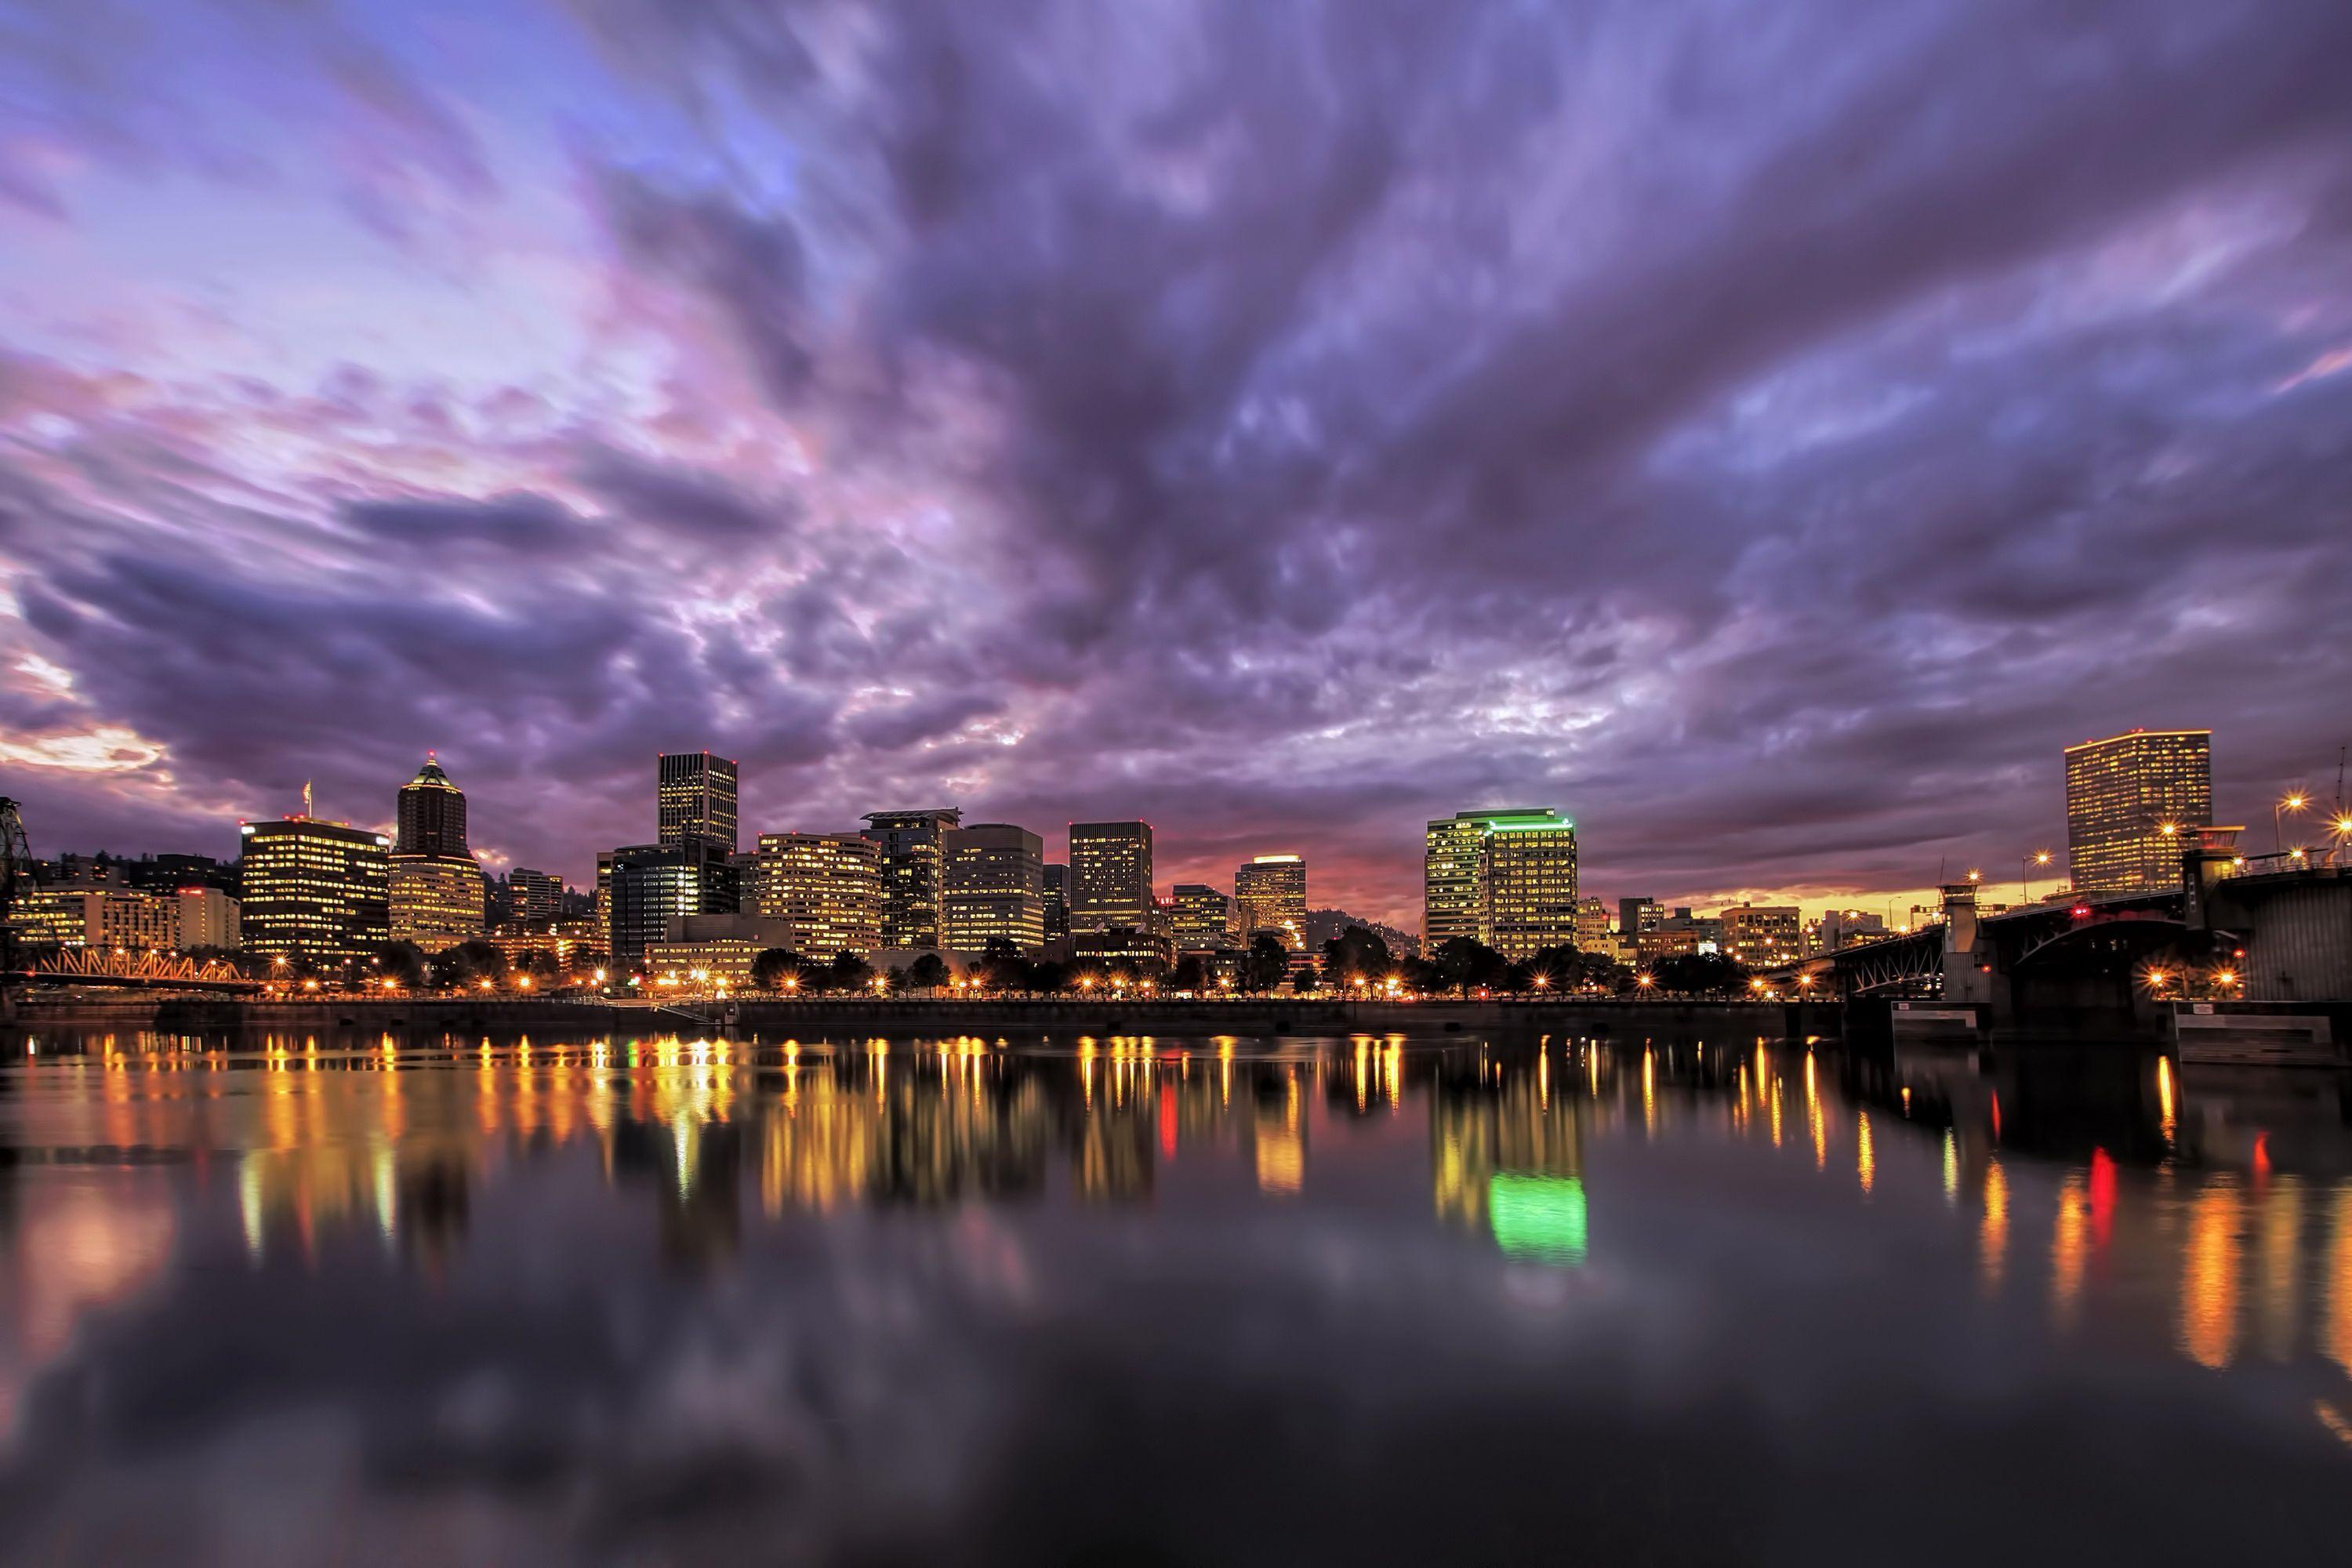 Downtown Portland Over Night City In Oregon Usa Hd Wallpaper For Desktop  3840x2160  Wallpapers13com